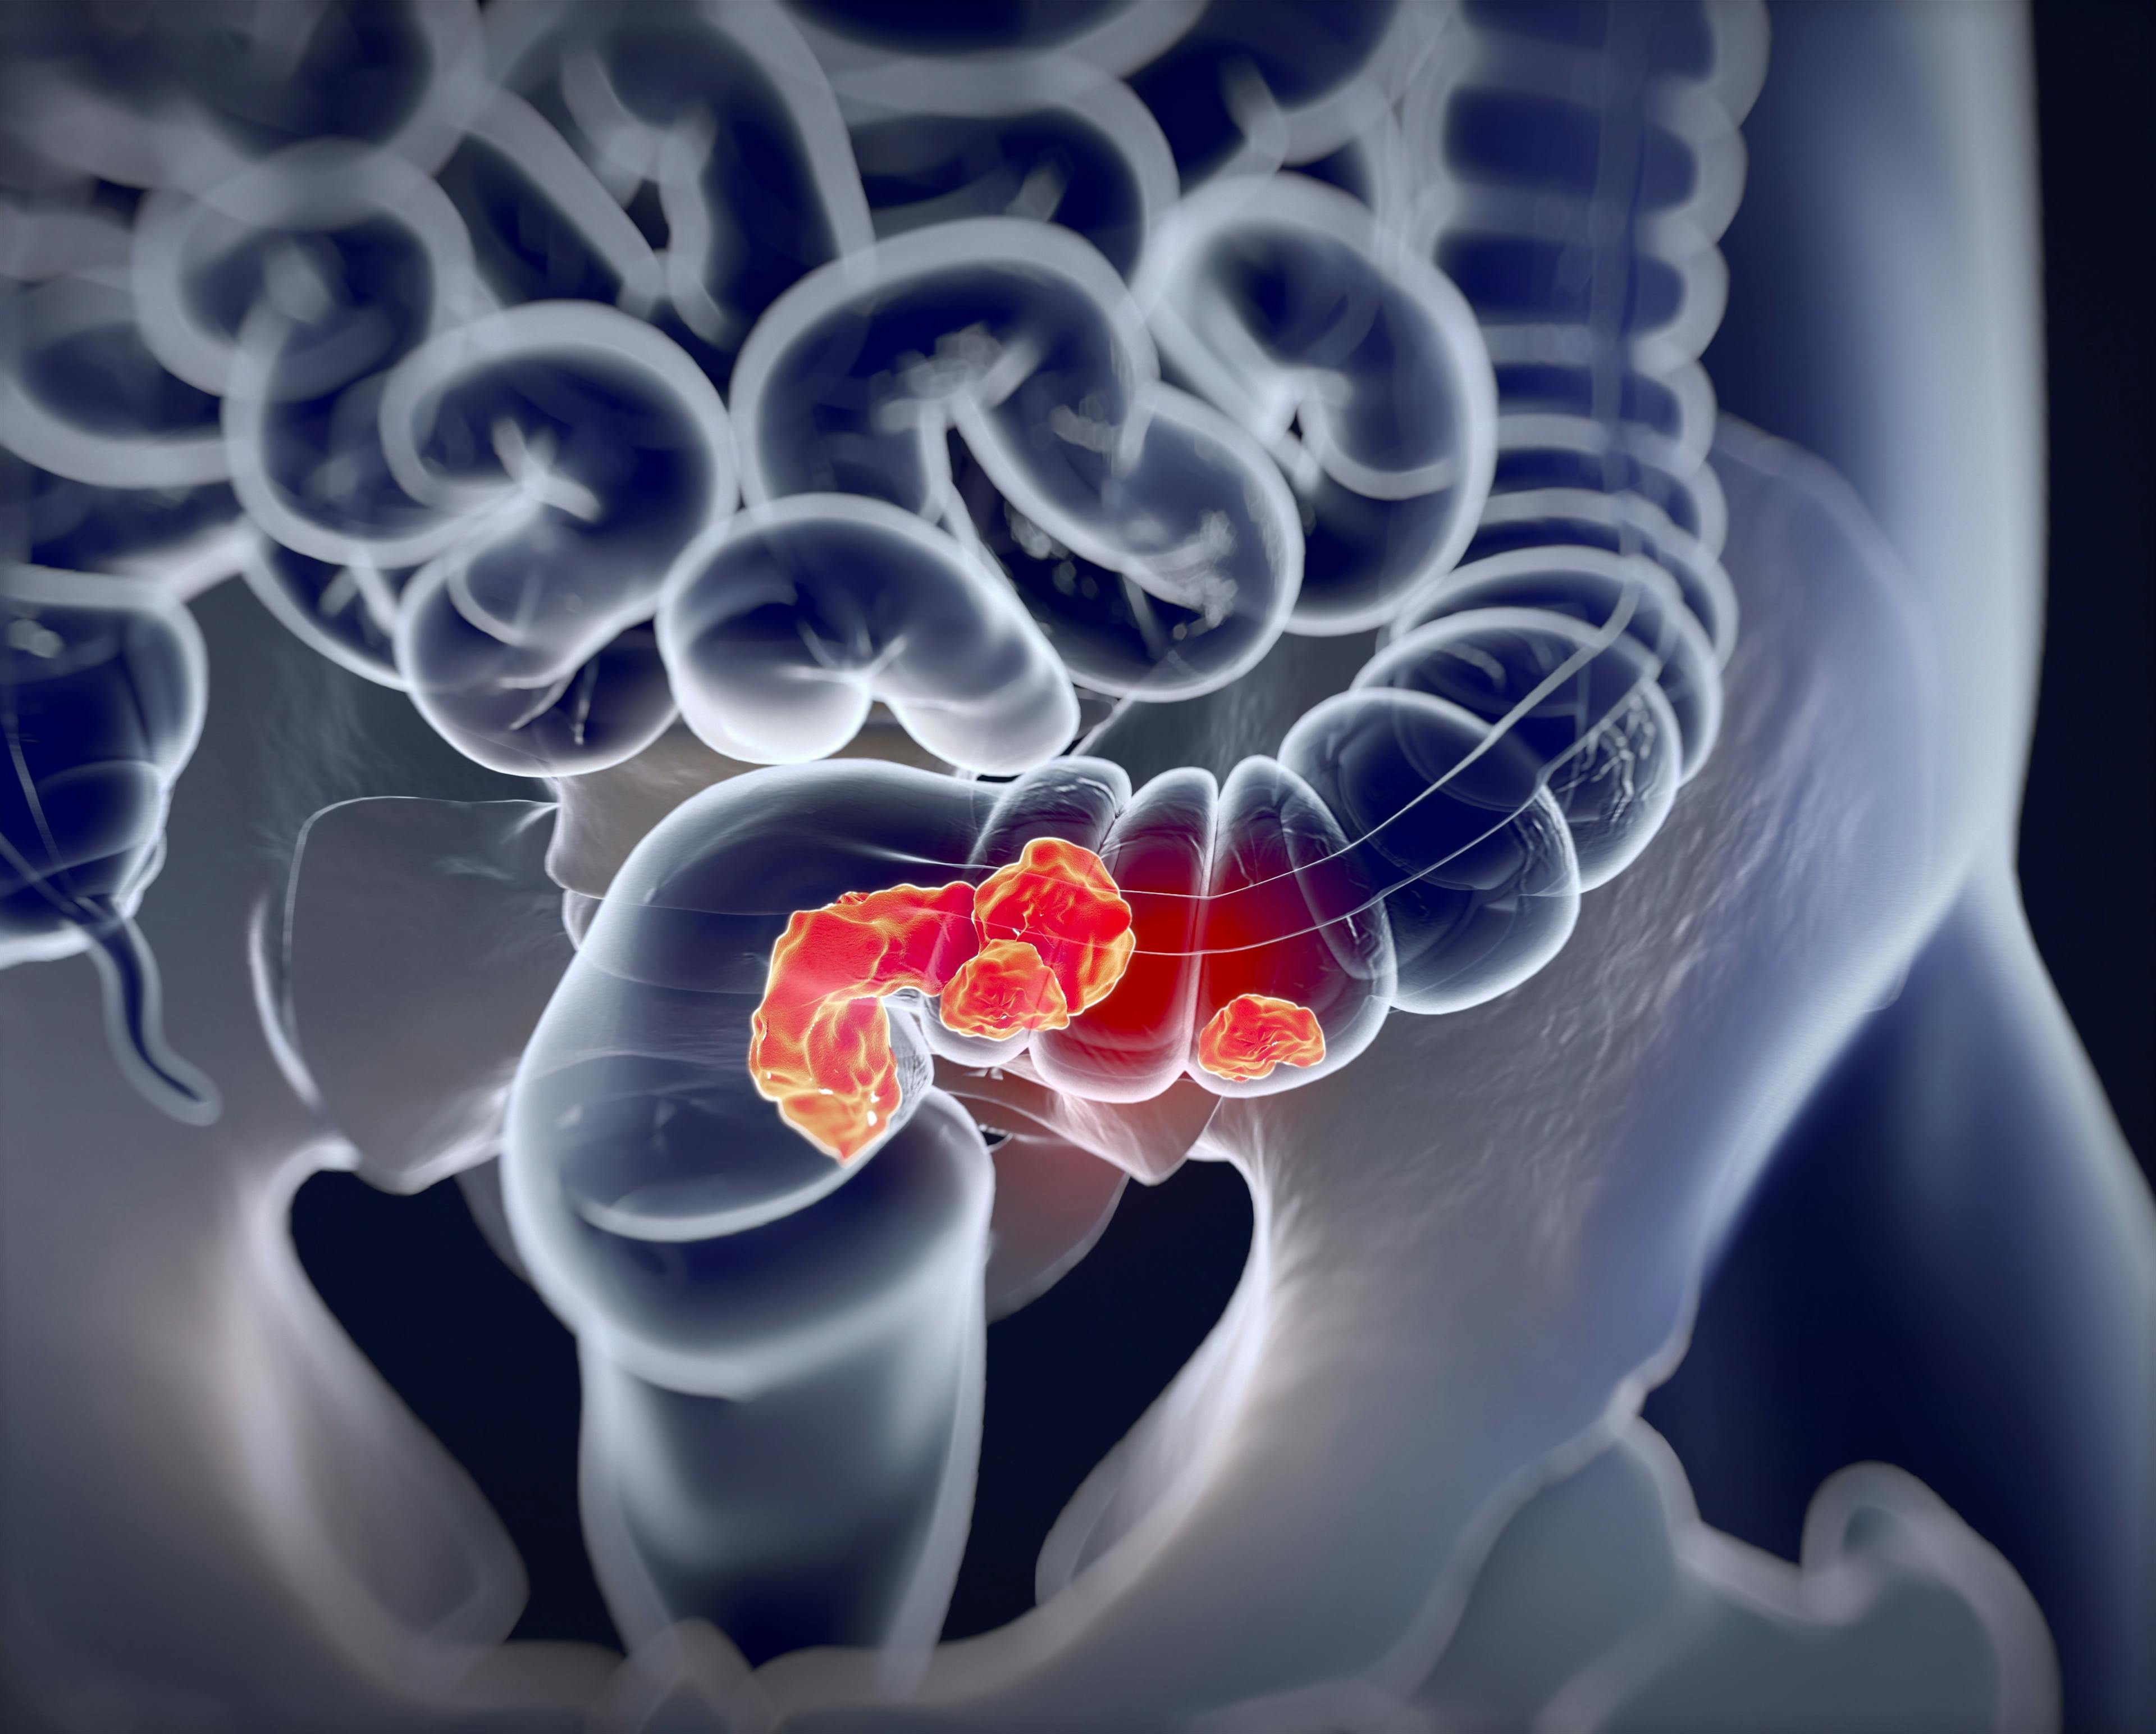 Recent Colon Cancer News and Updates Patients and Survivors May Have Missed